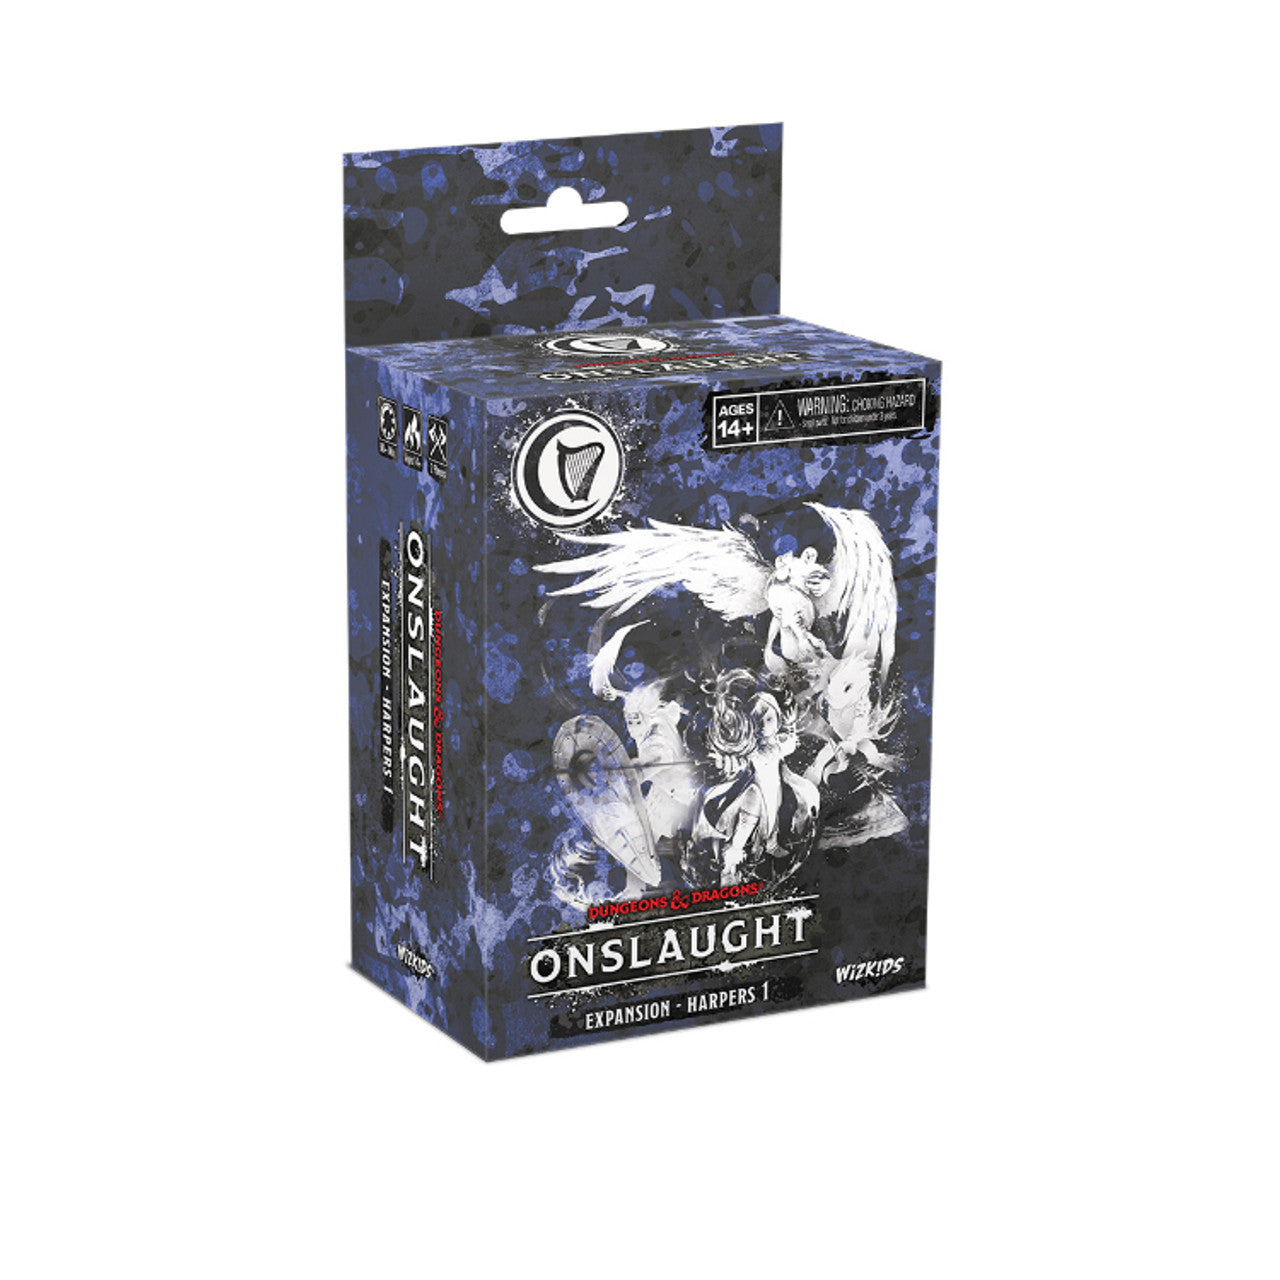 Dungeons & Dragons: Onslaught - Harpers 1 Expansion